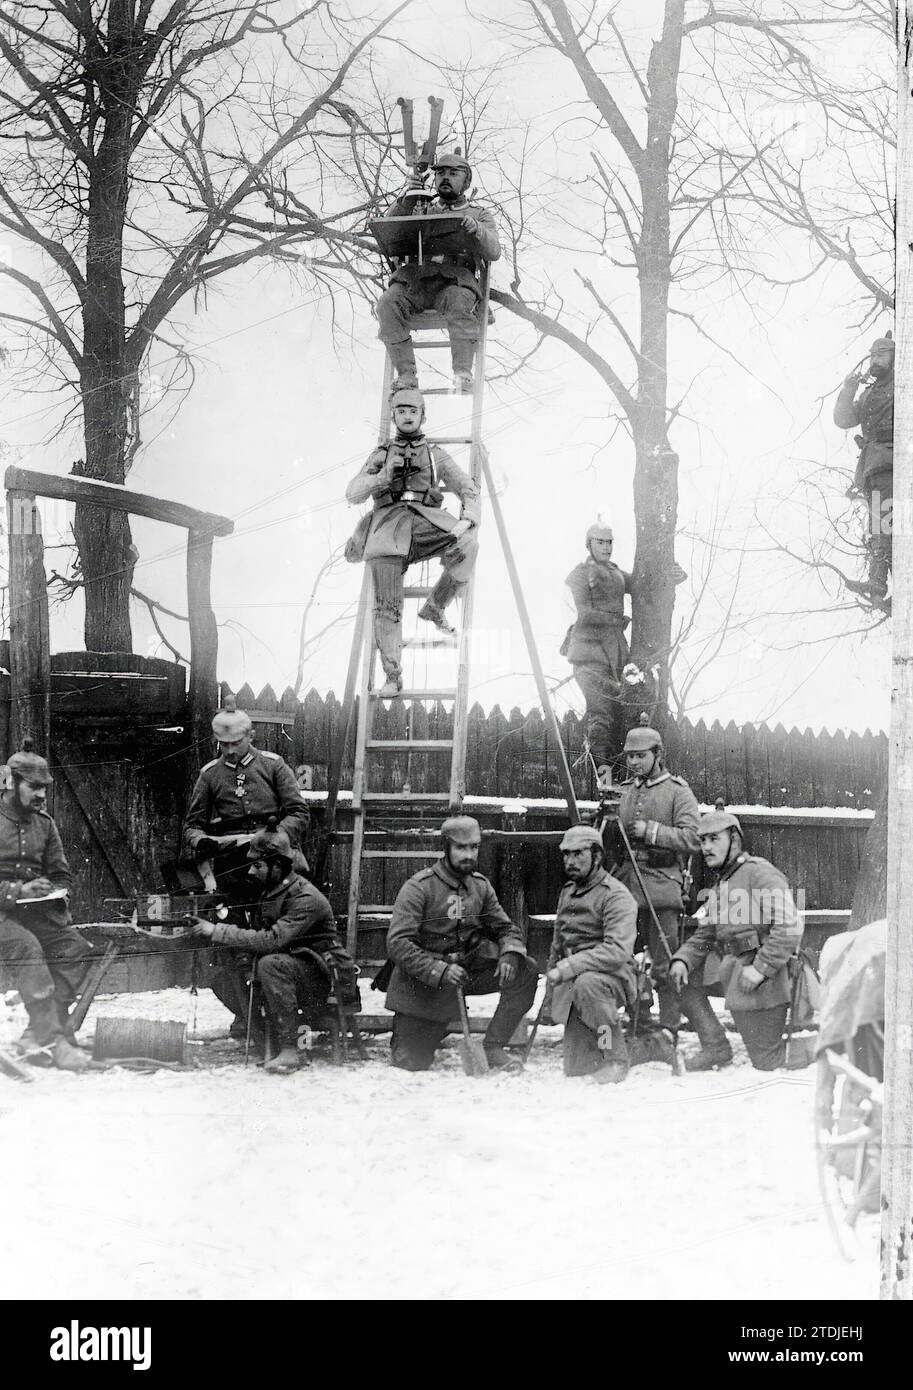 02/07/1915. The Germans in Campaign. Artillery observation post of the German Imperial Guard - photo Haeckel. Credit: Album / Archivo ABC / Gebruder Haeckel Stock Photo